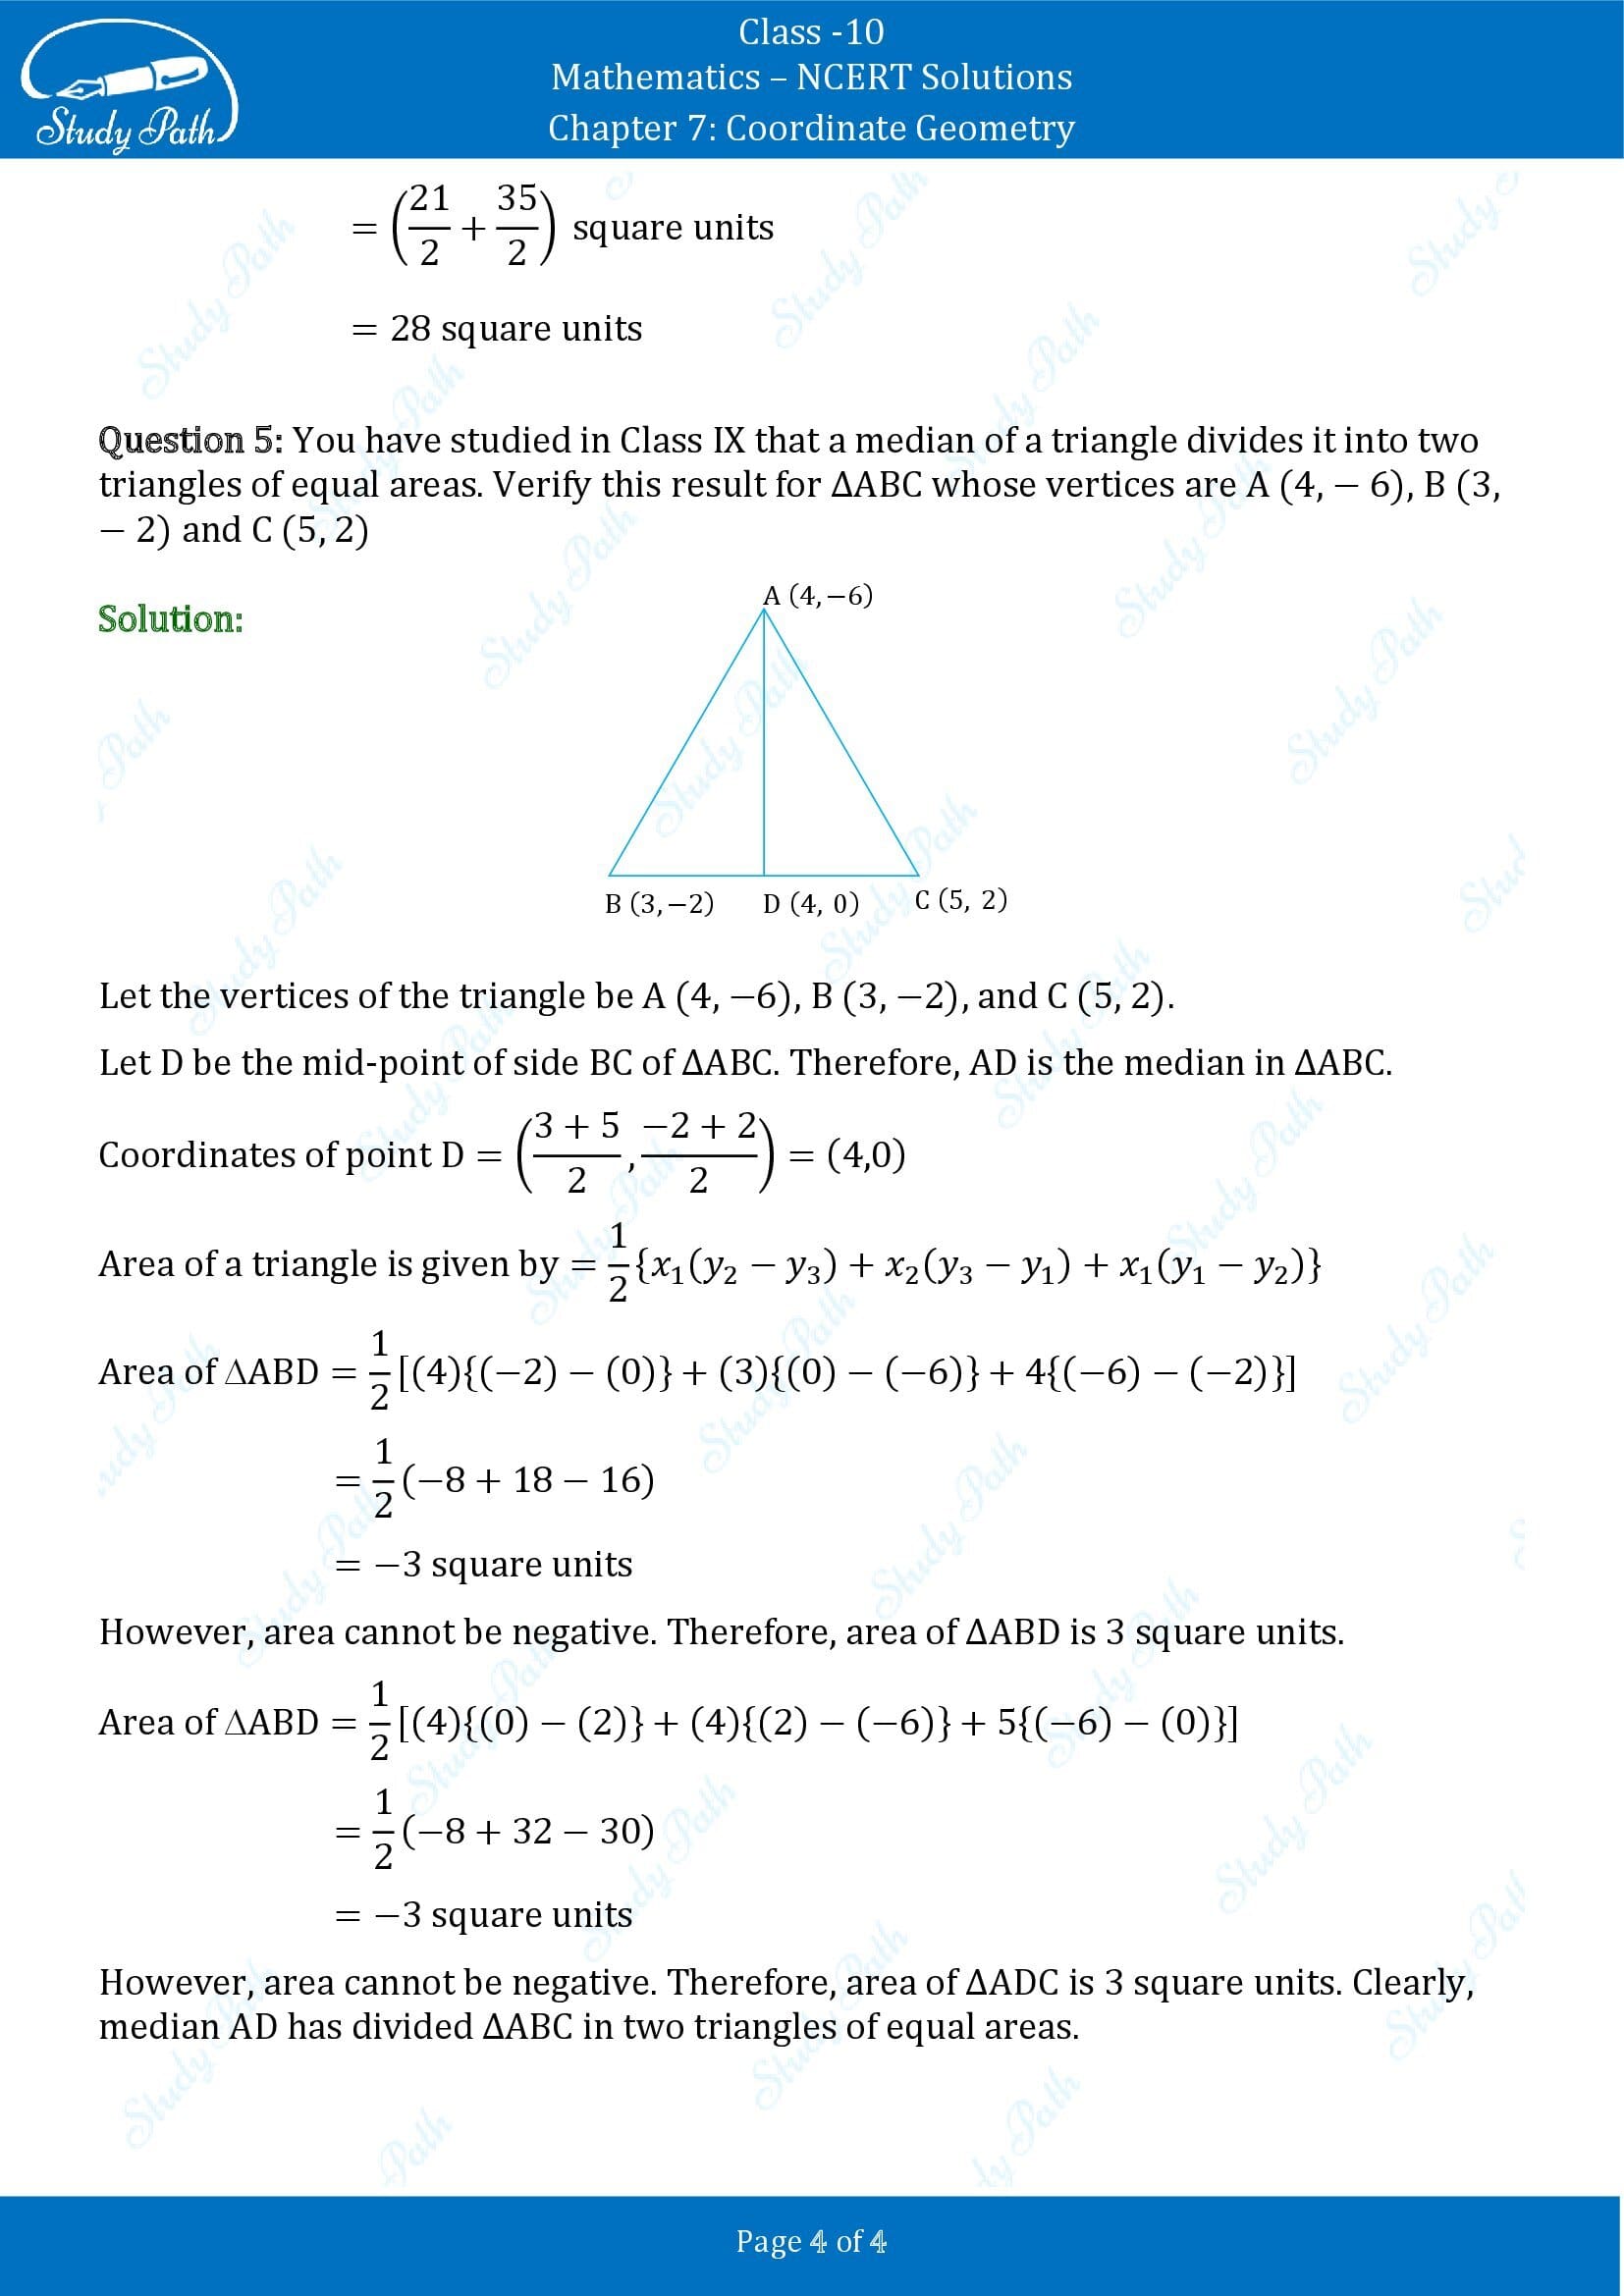 NCERT Solutions for Class 10 Maths Chapter 7 Coordinate Geometry Exercise 7.3 00004